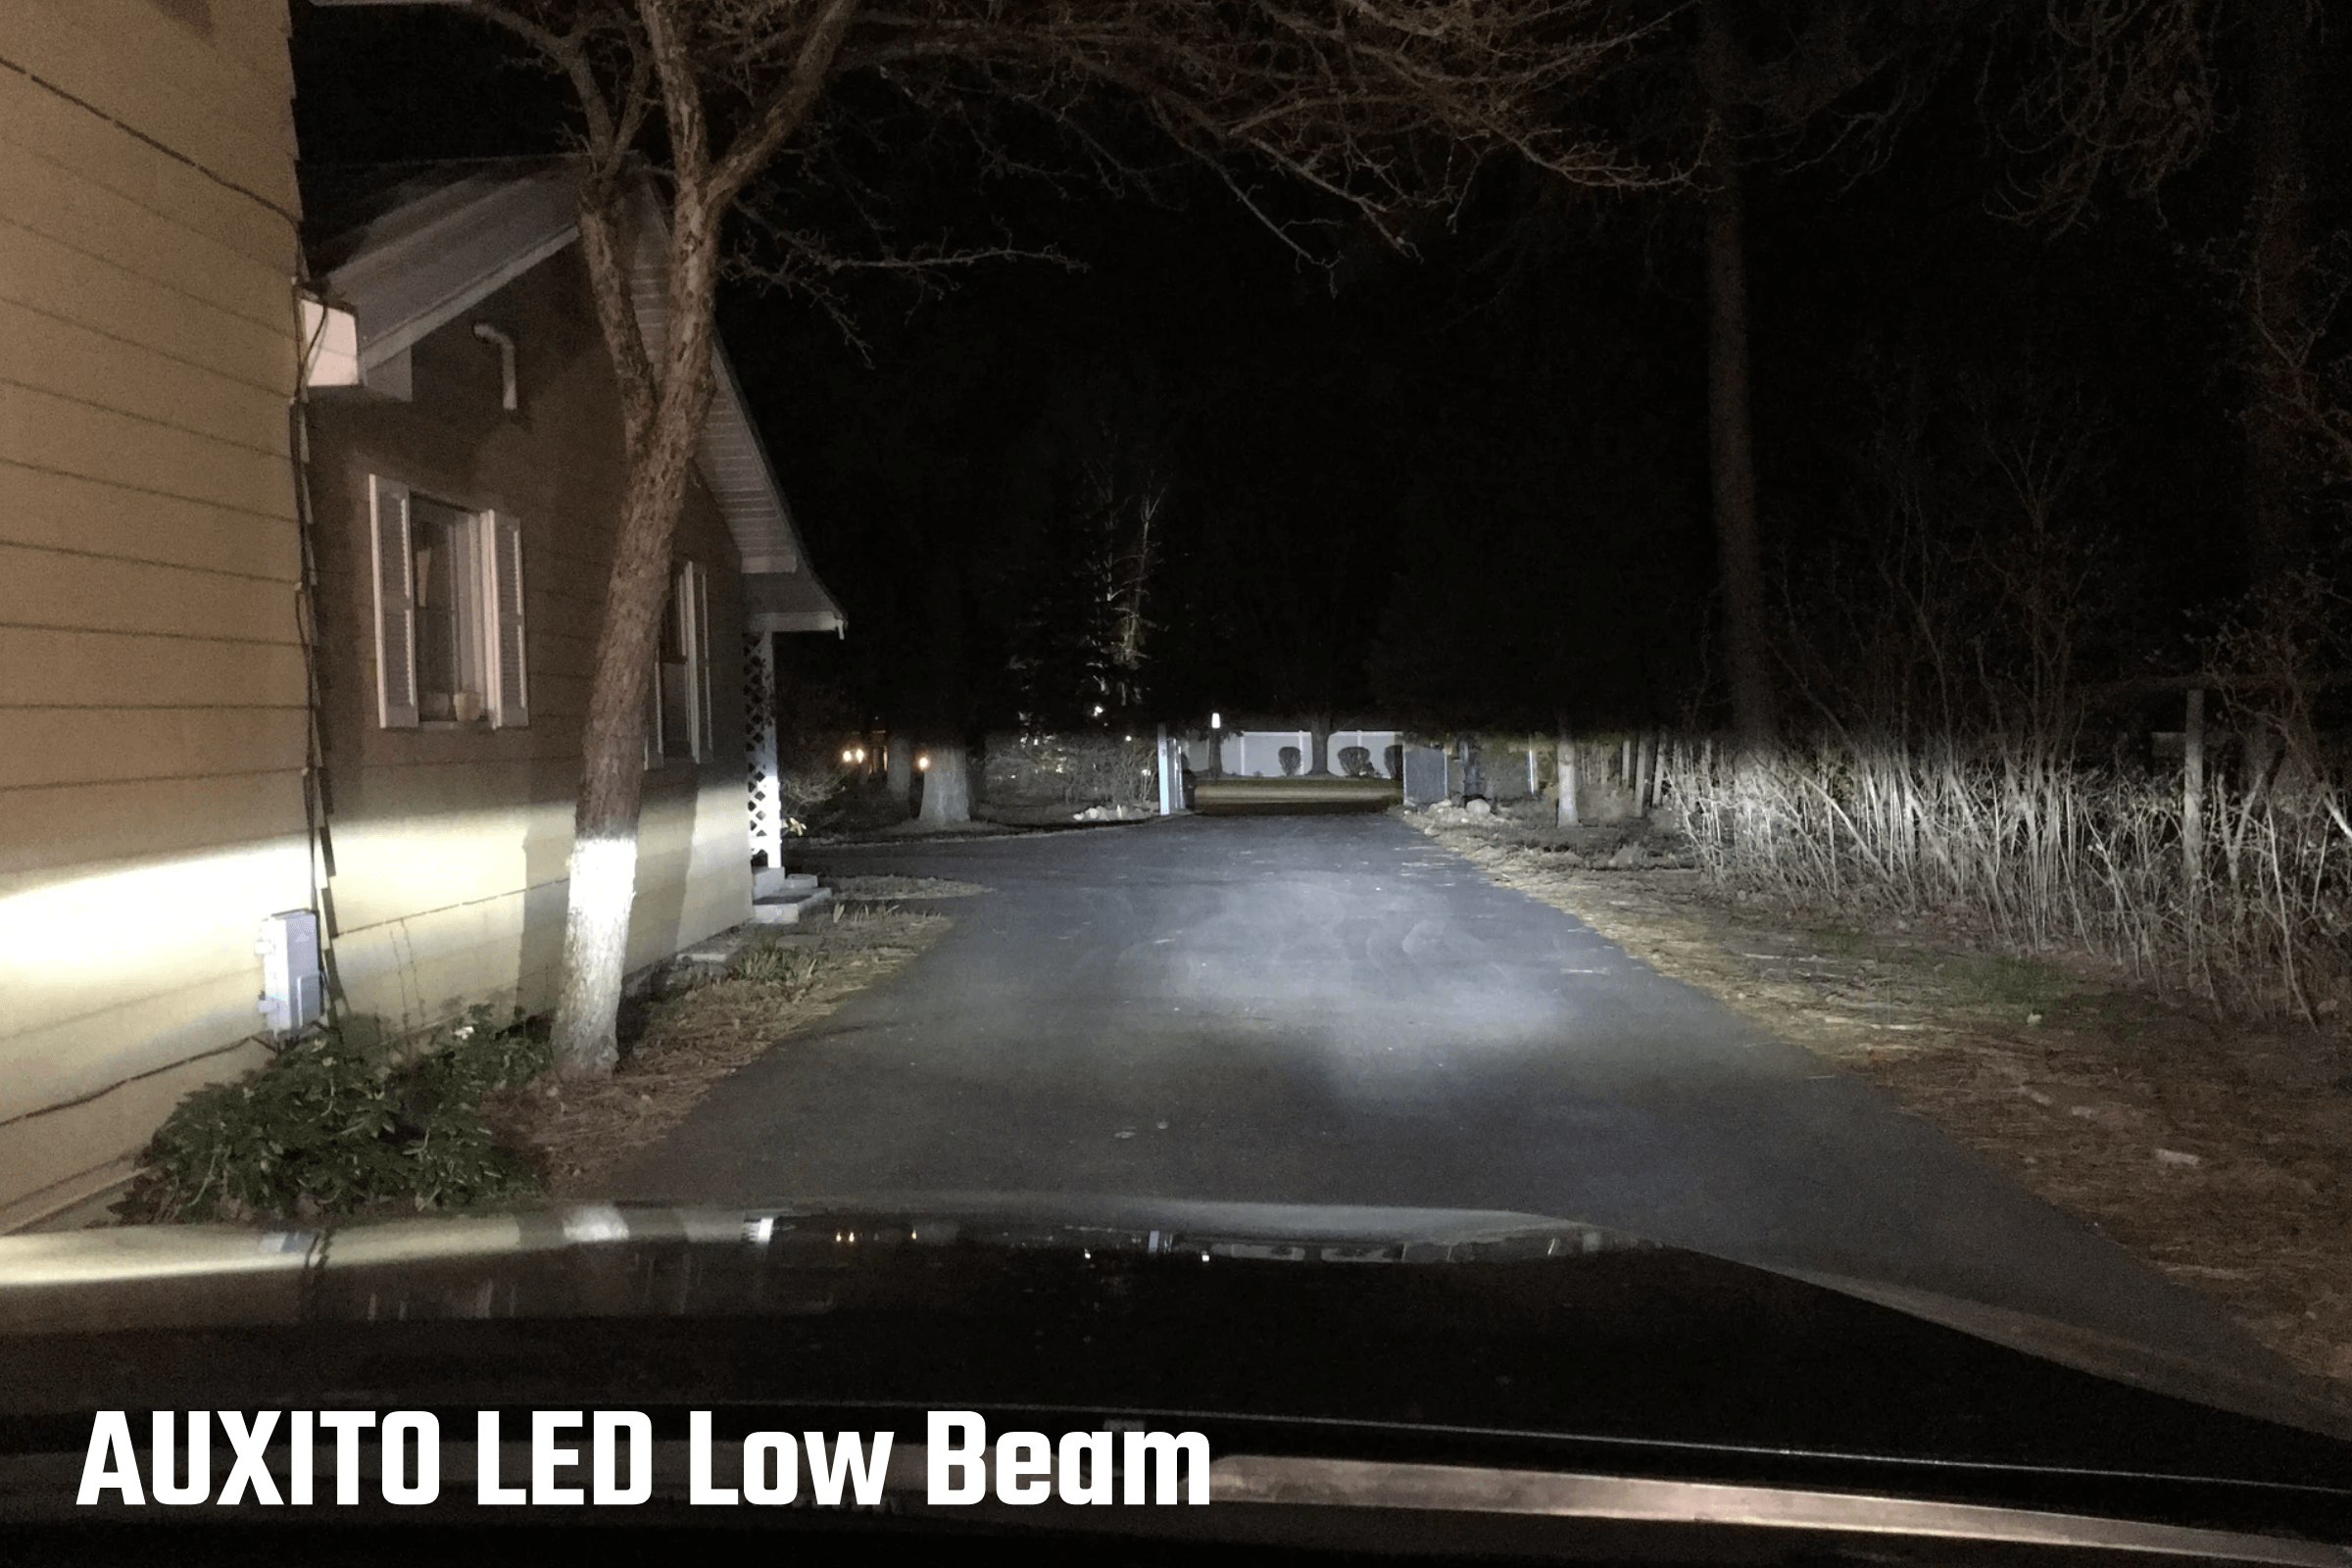 Philips LED H4 Headlight Bulb Review